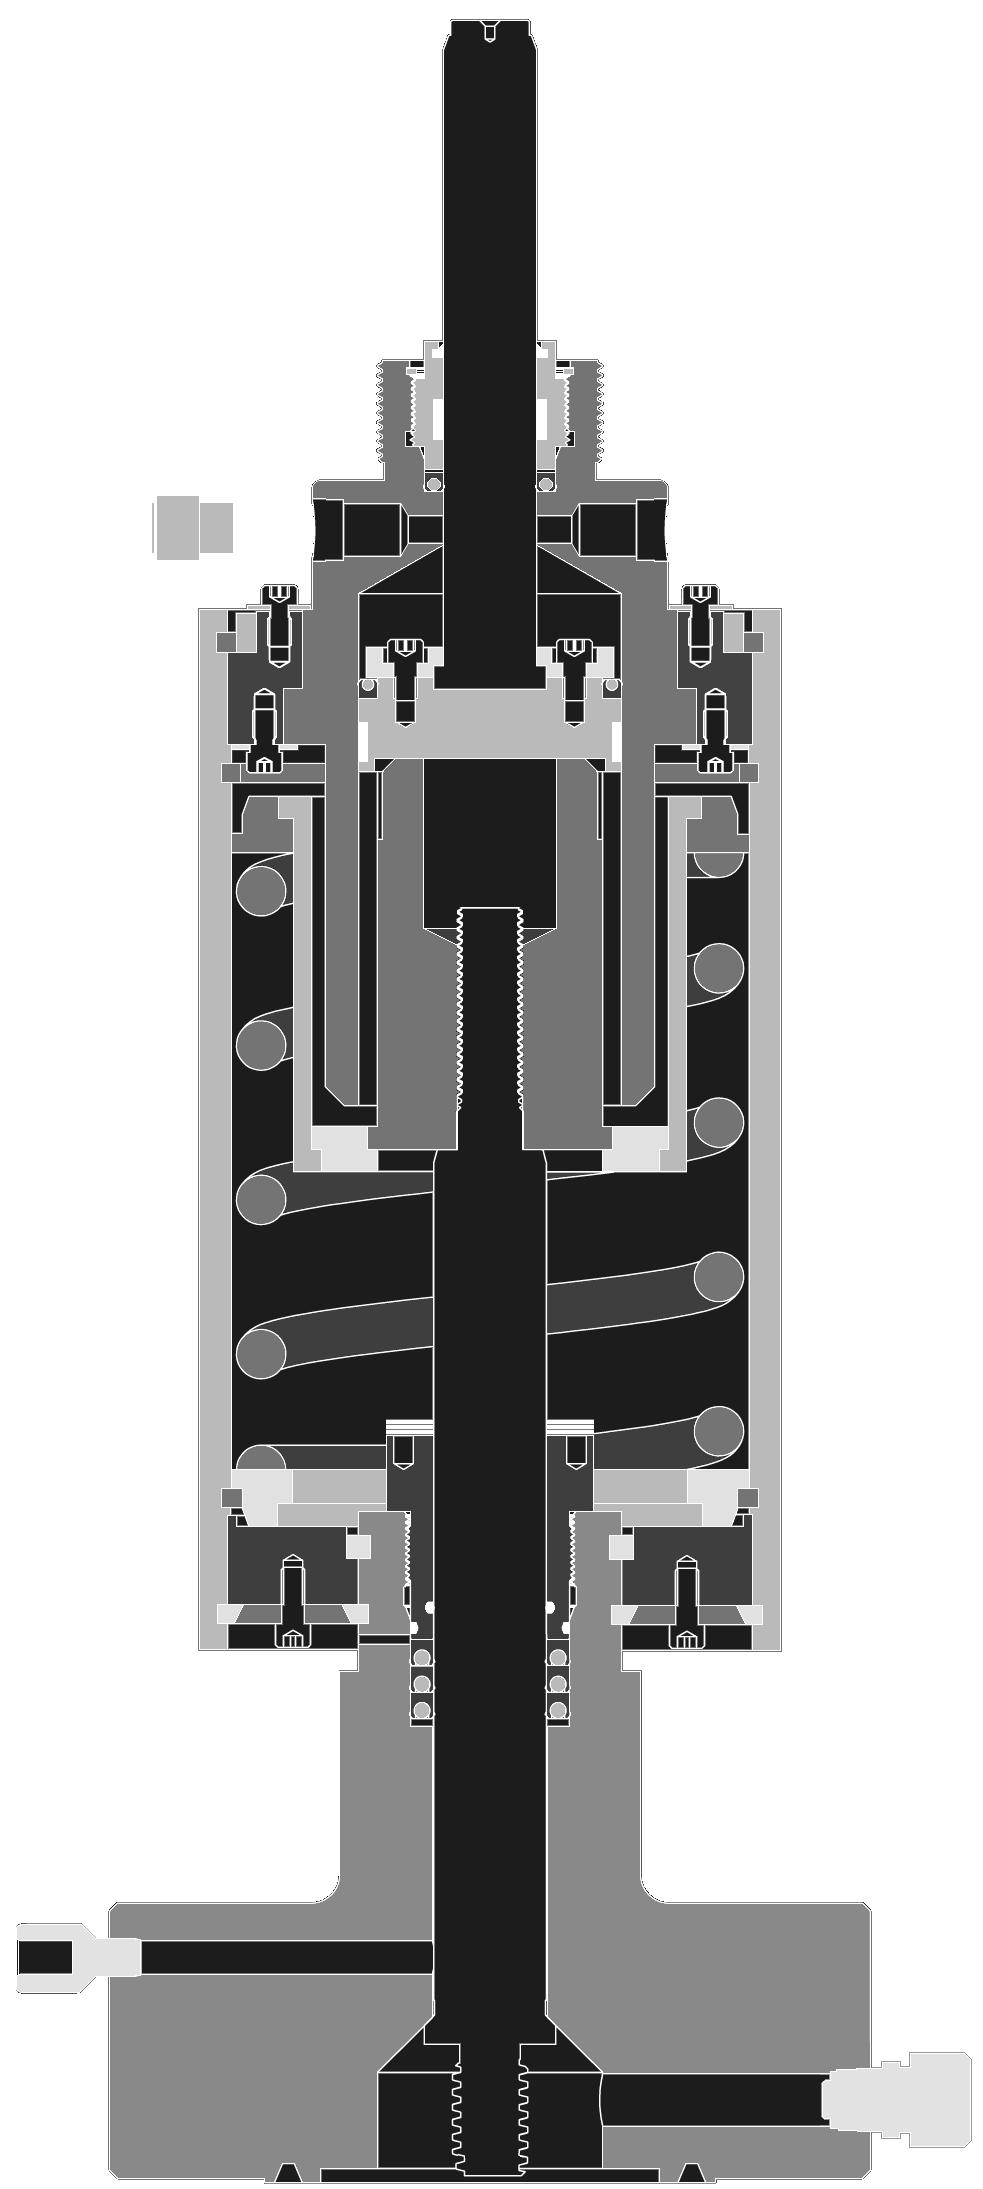 INTERNAL CONFIGURATION Actuator depicted with typical 10,000 / 15,000 psi bonnet See Note 2 below 1 7 2 14 13 8 9 10 3 4 12 16 17 19 20 22 24 26 11 15 18 21 23 25 27 5 6 Upper Shaft Seal Detail 38 39